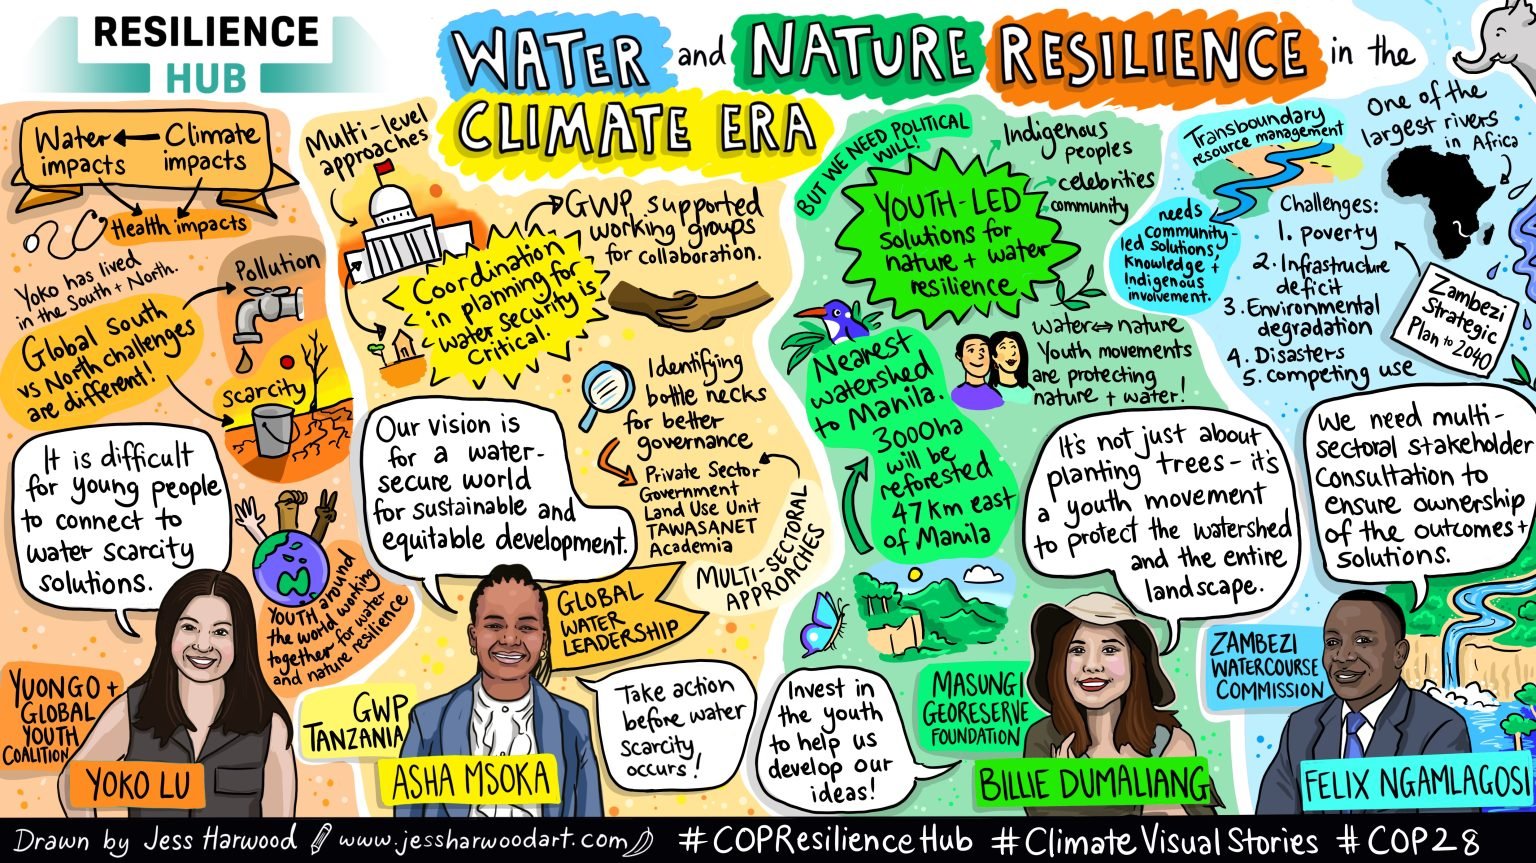 1. Water Resilience in the Climate Era